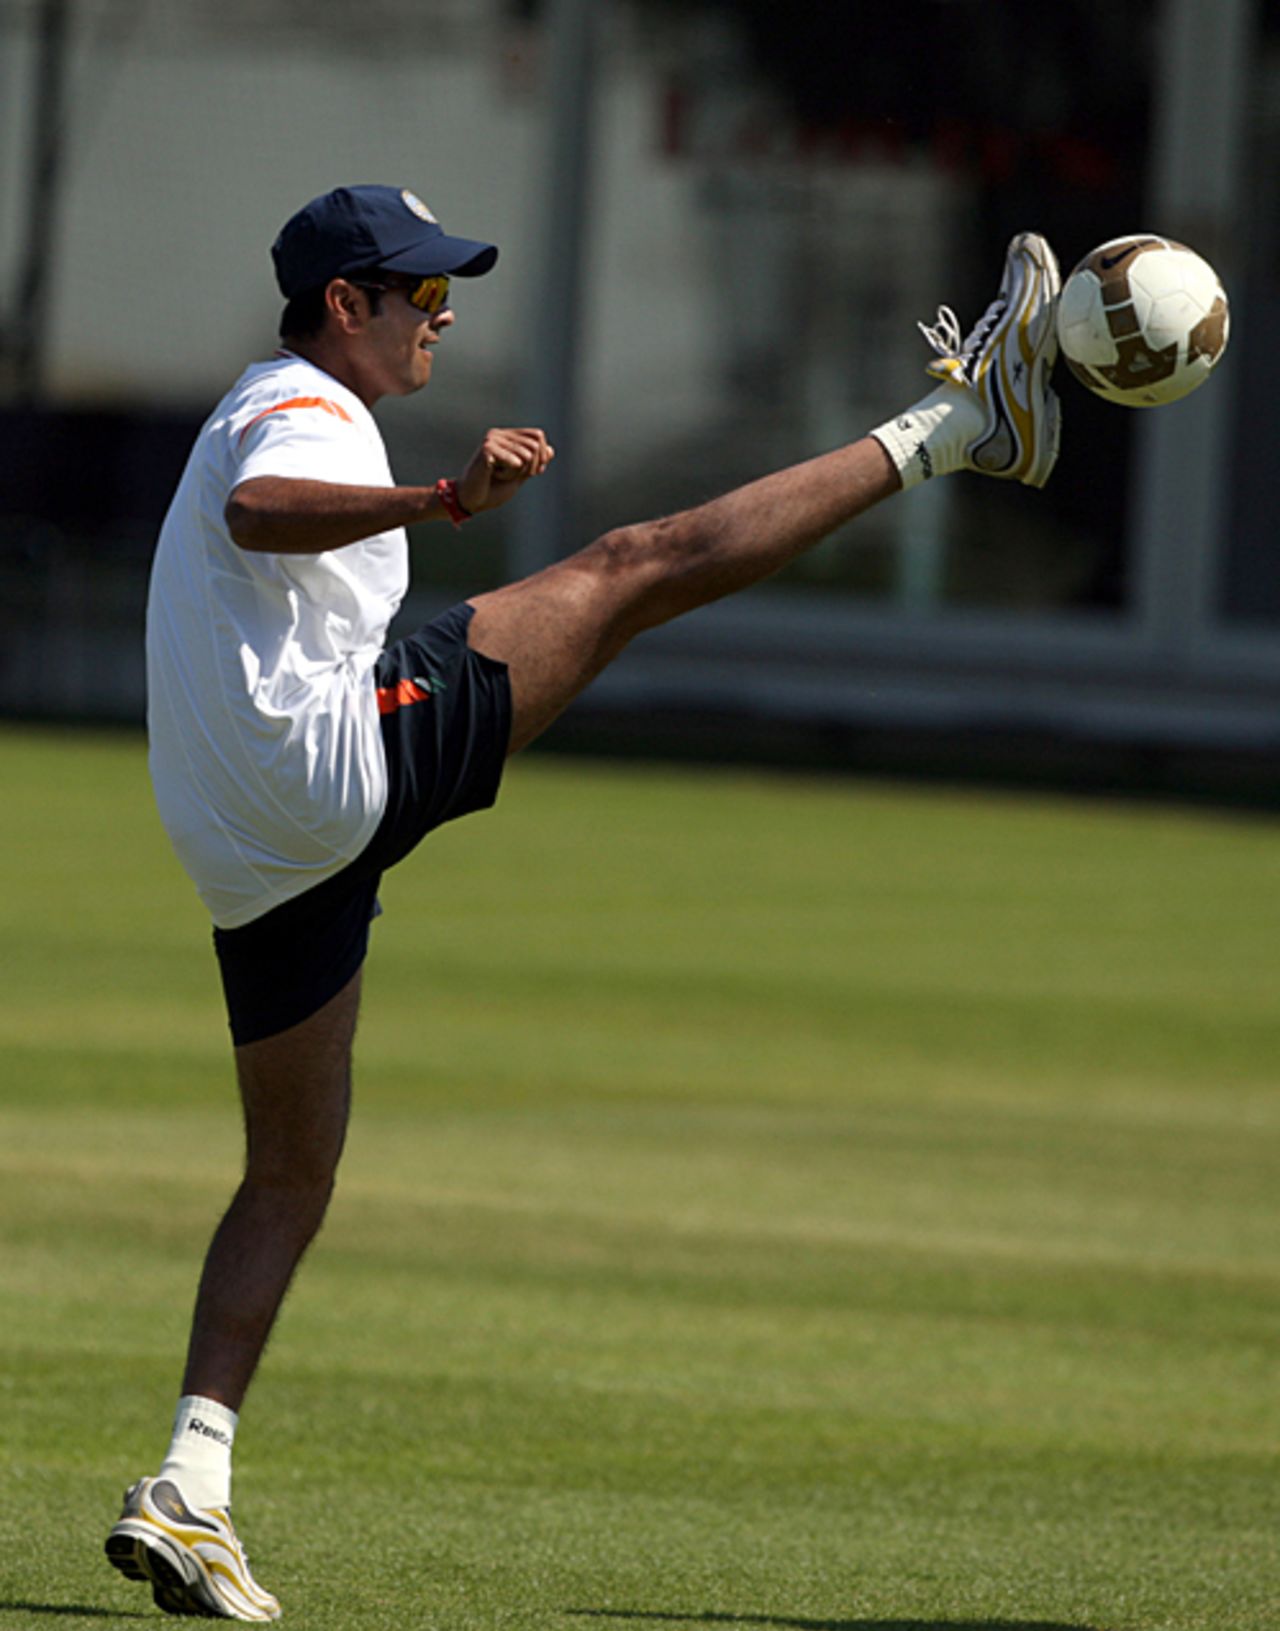 RP Singh at full stretch during a game of football, Lord's, May 31, 2009